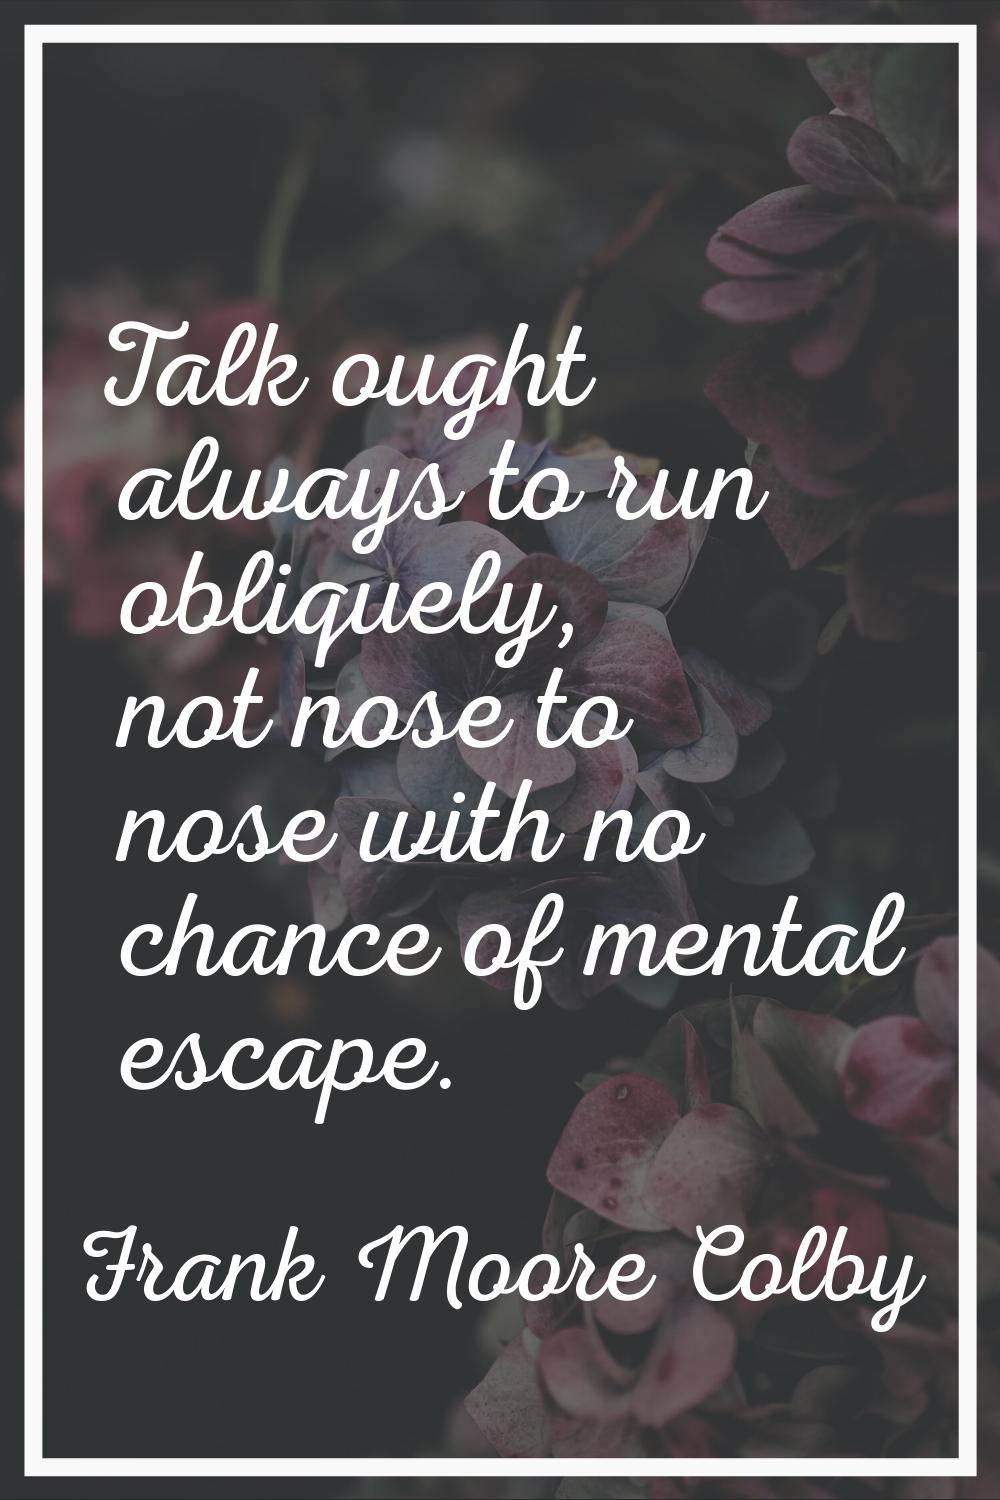 Talk ought always to run obliquely, not nose to nose with no chance of mental escape.